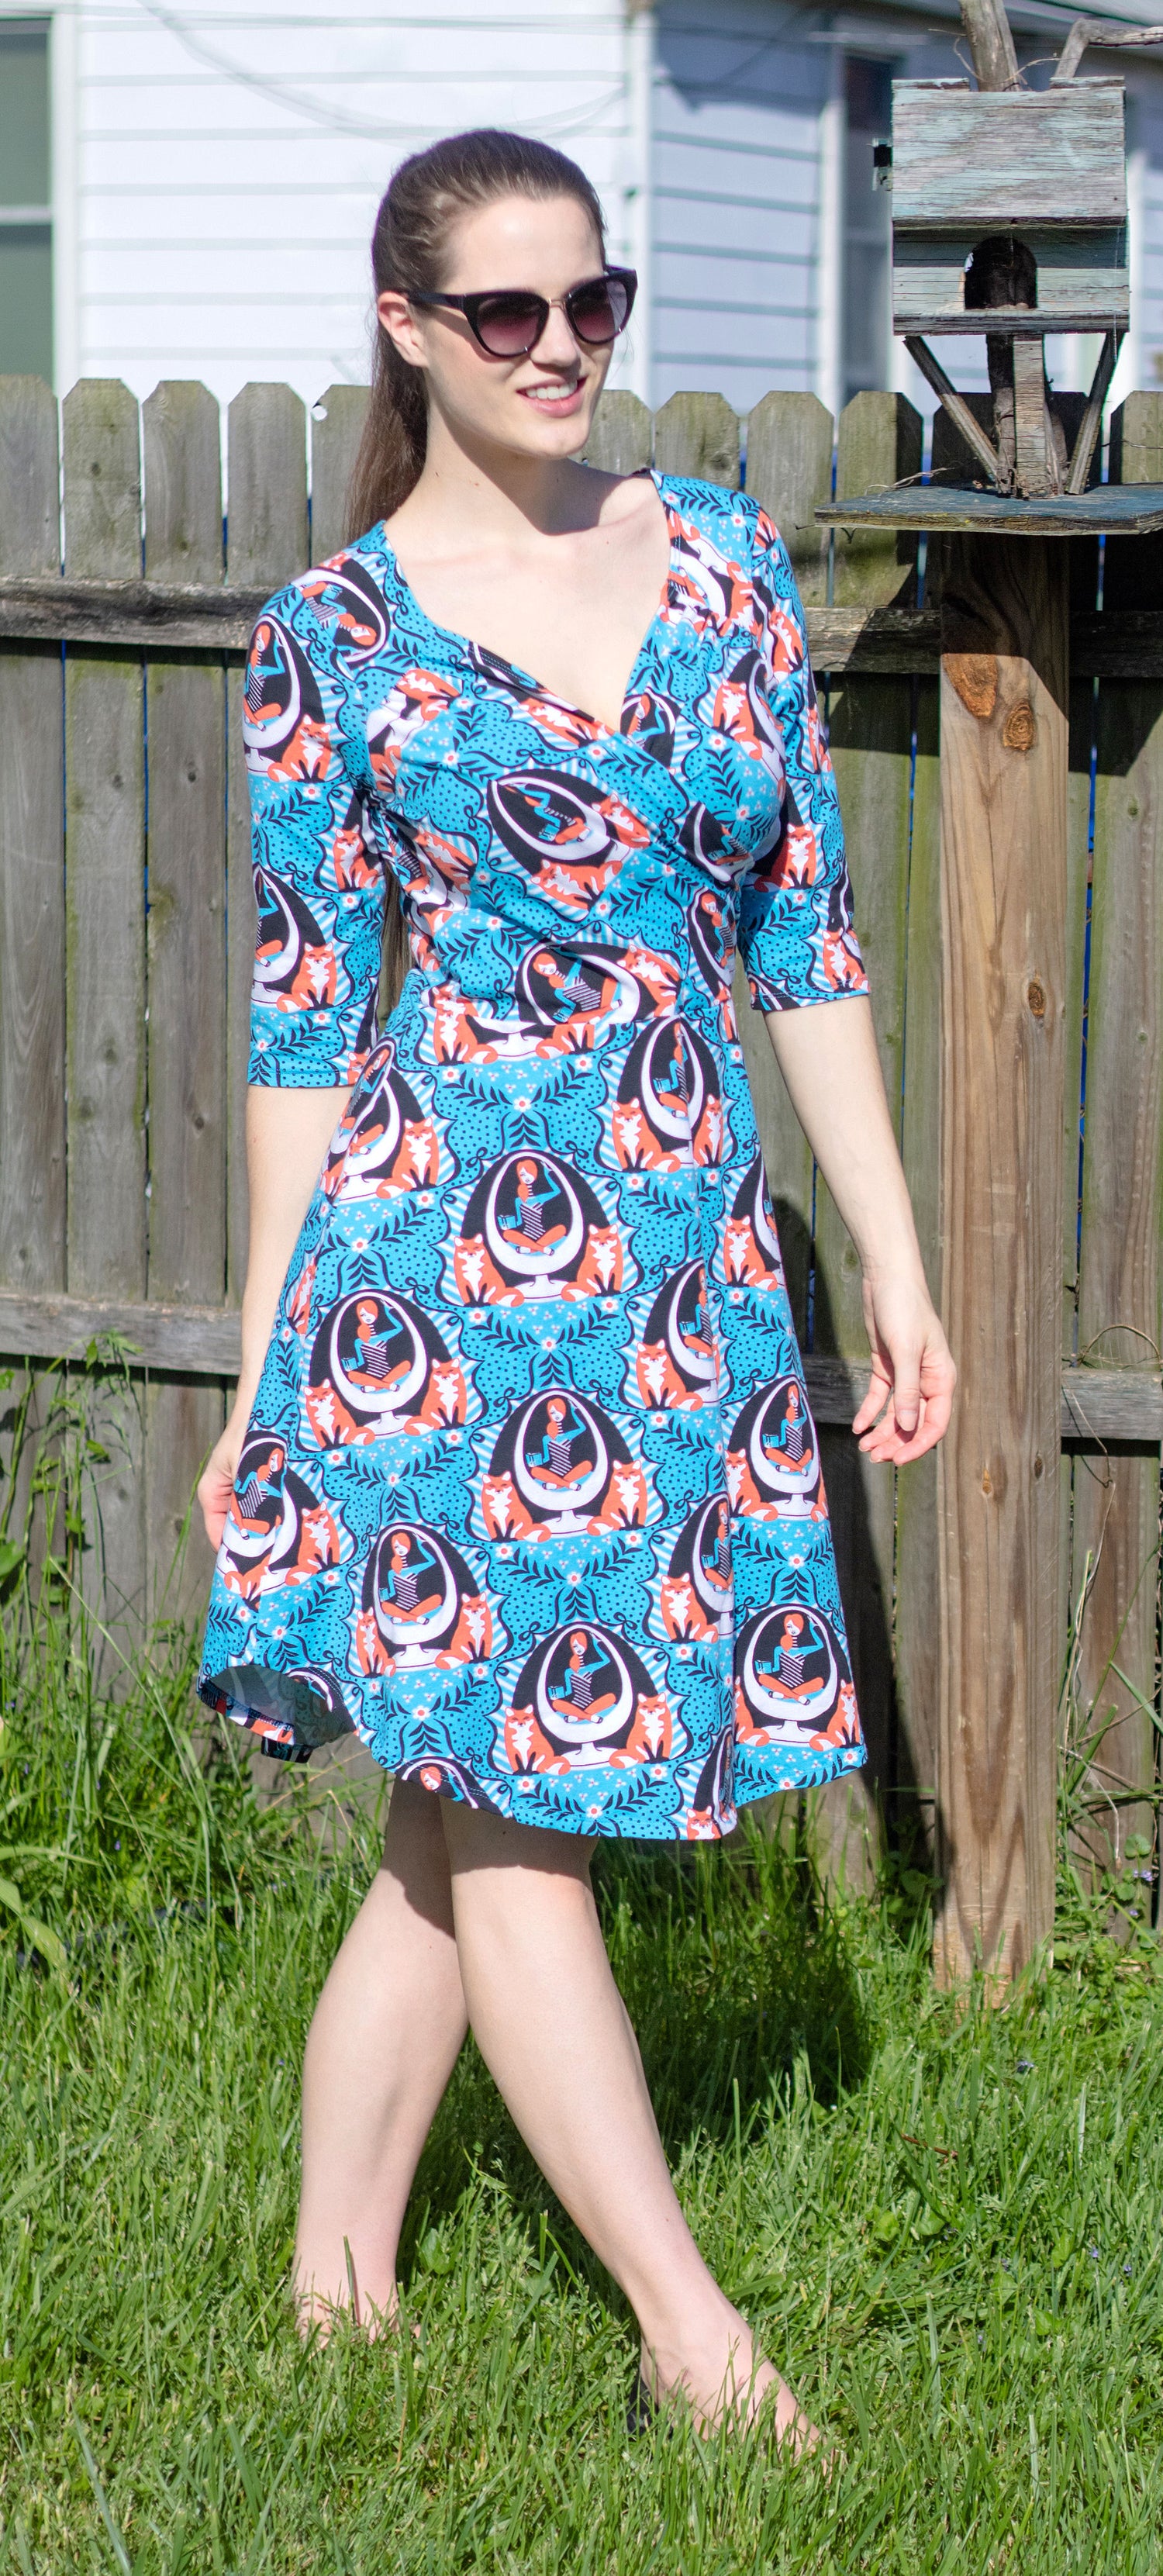 Model walking outside in blue sleeved wrap dress featuring print of foxes and girls reading books sitting in an egg chair